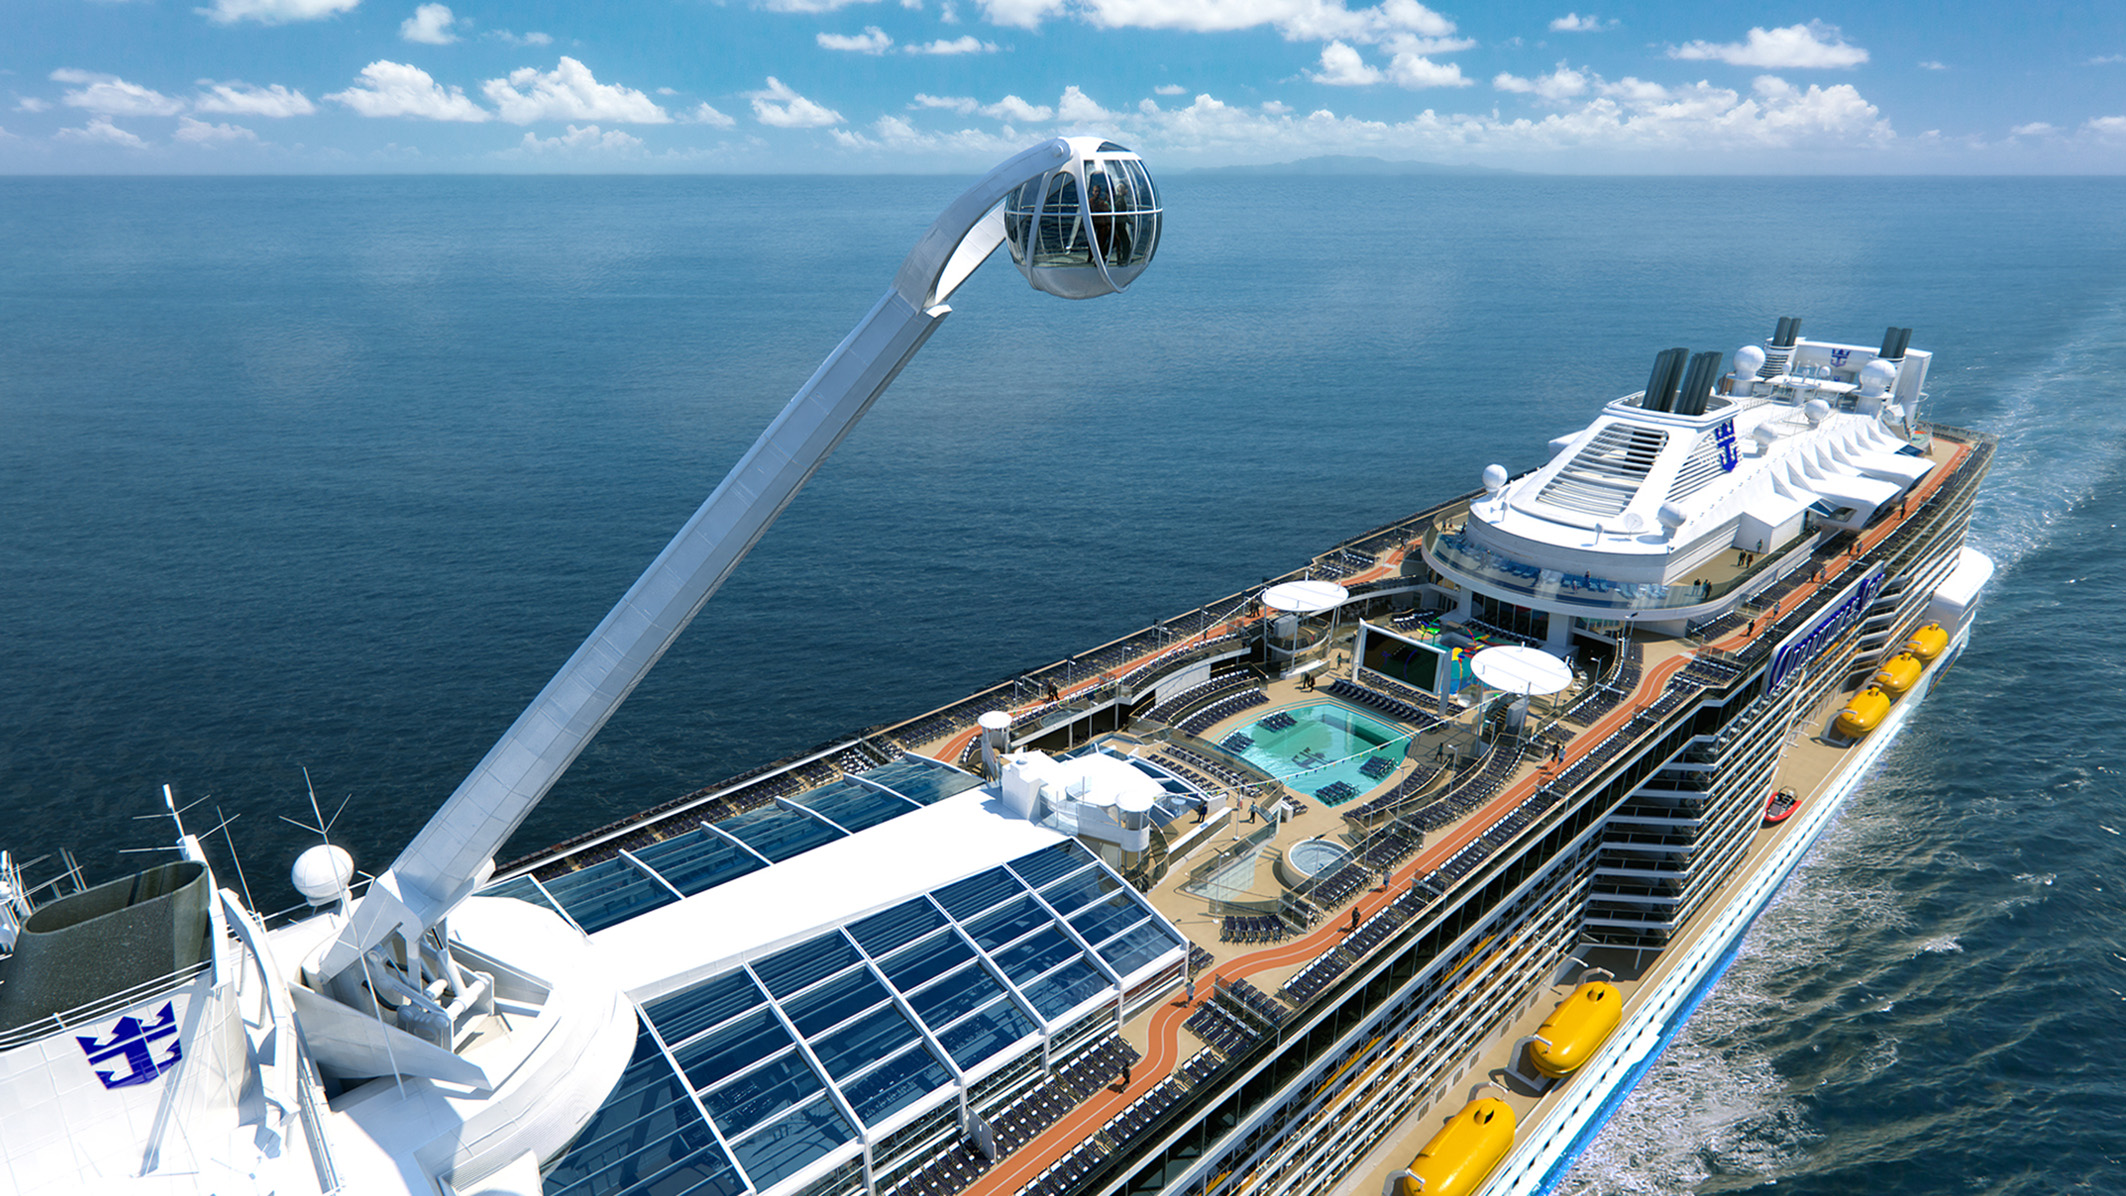 Cancelled repositioning cruises after Ovation of the Seas extends season - ...